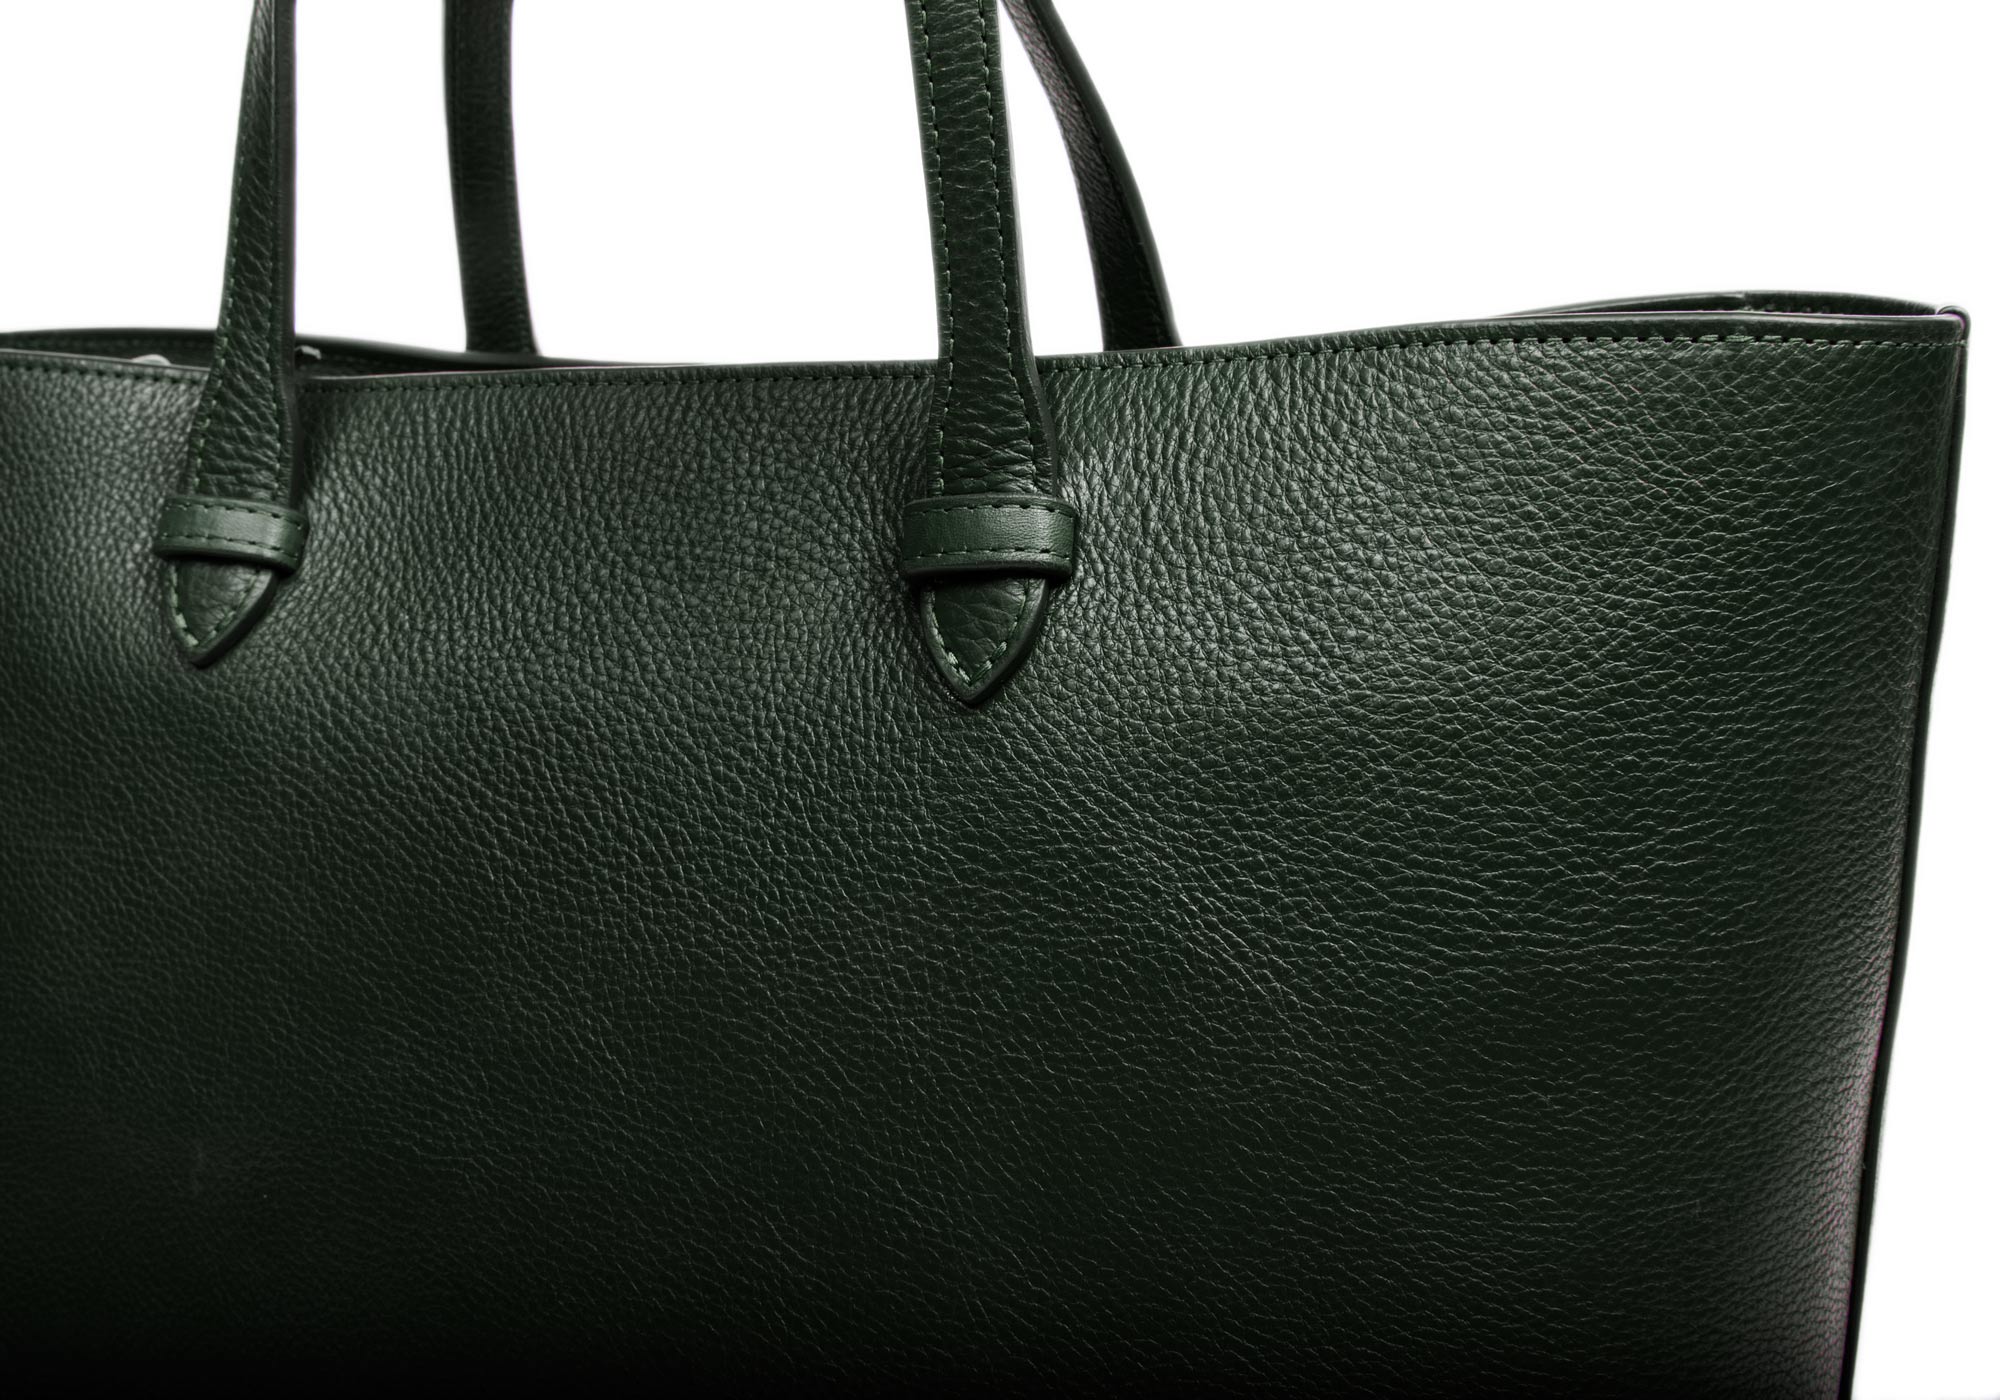 No. 12 Leather Tote Green